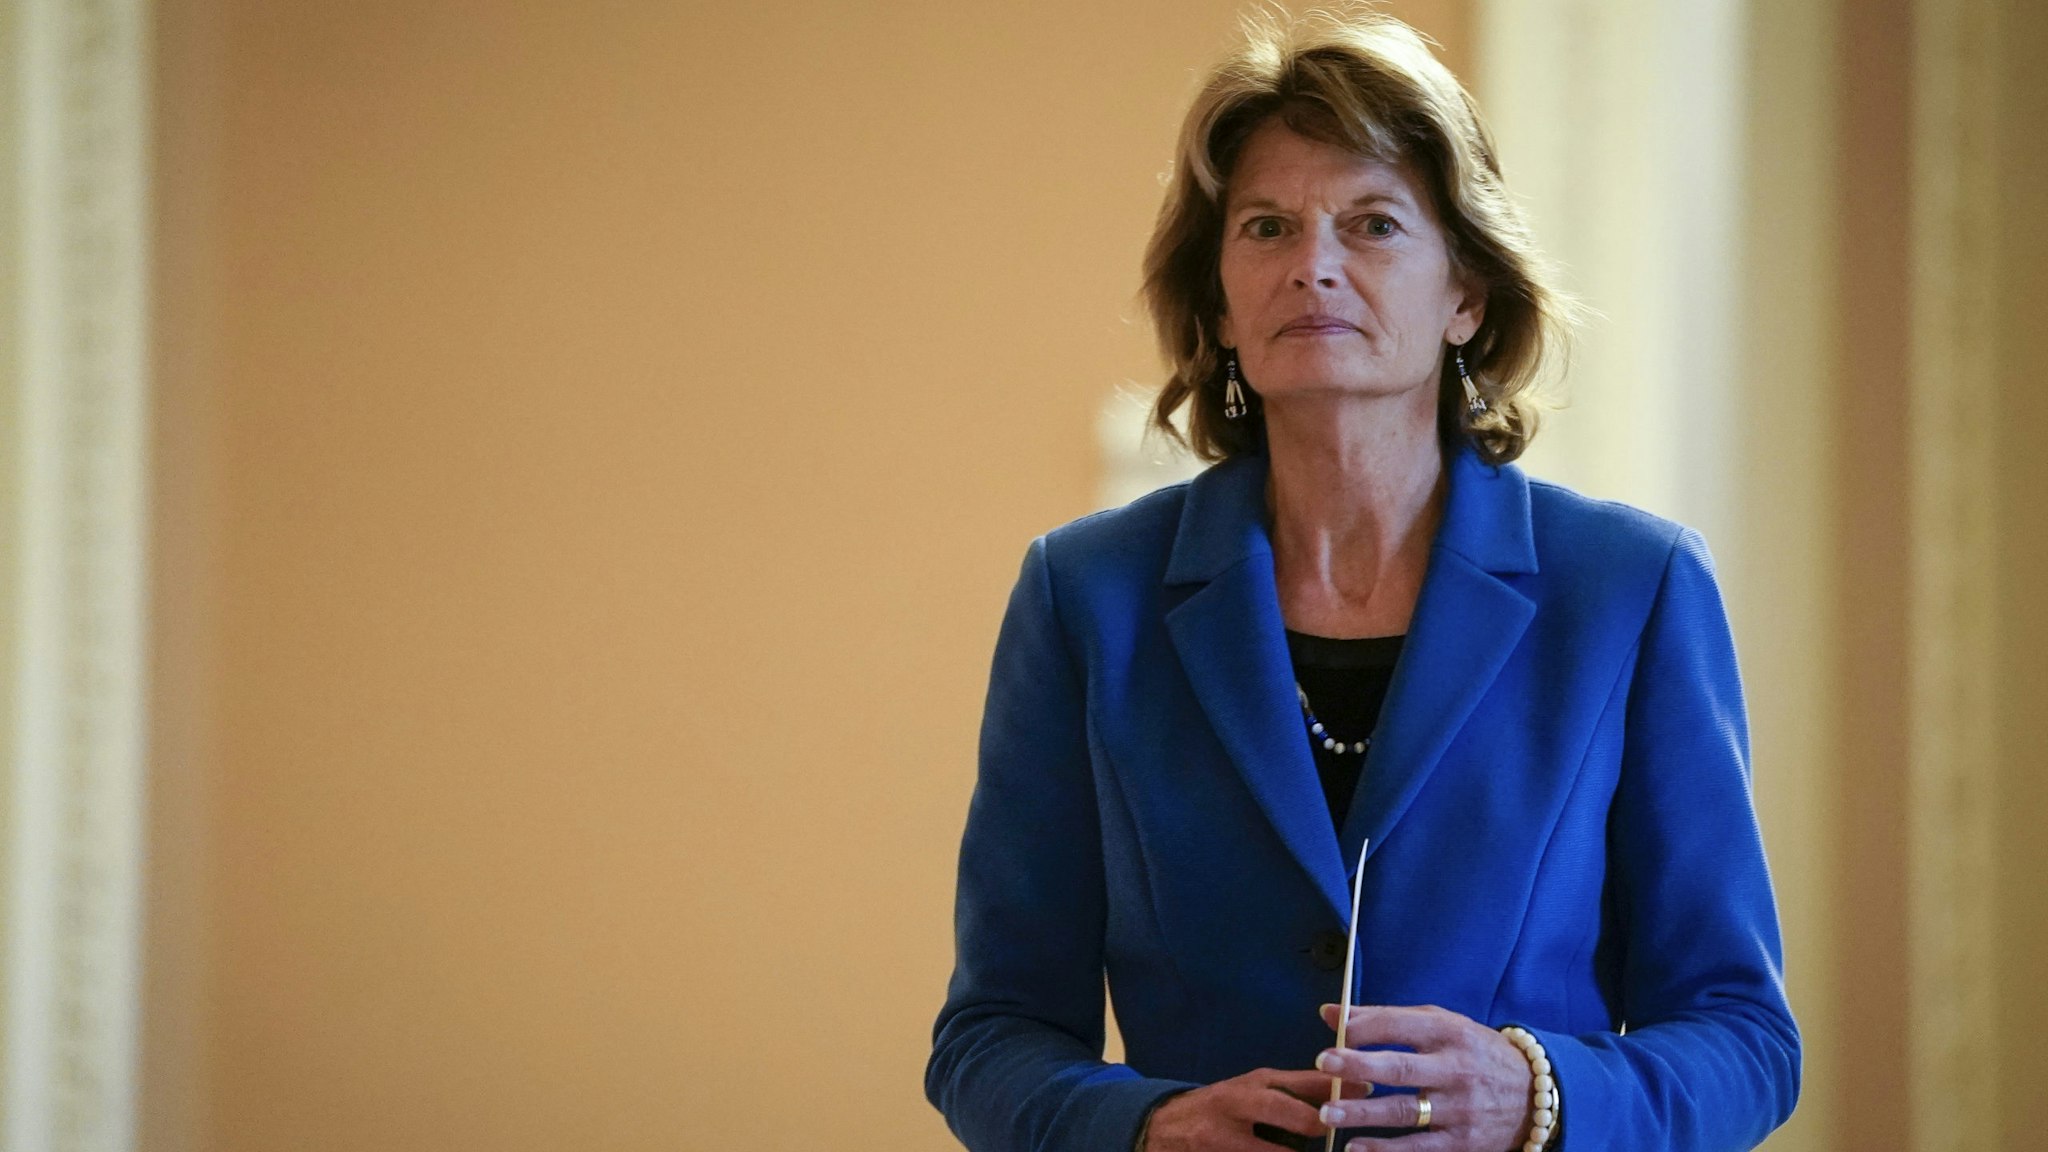 WASHINGTON, DC - JANUARY 31: Sen. Lisa Murkowski (R-AK) returns to the Senate chamber after a recess in the Senate impeachment trial of U.S. President Donald Trump at the U.S. Capitol on January 31, 2020 in Washington, DC. On Friday, Senators are expected to debate and then vote on whether to include additional witnesses and documents. (Photo by Drew Angerer/Getty Images)